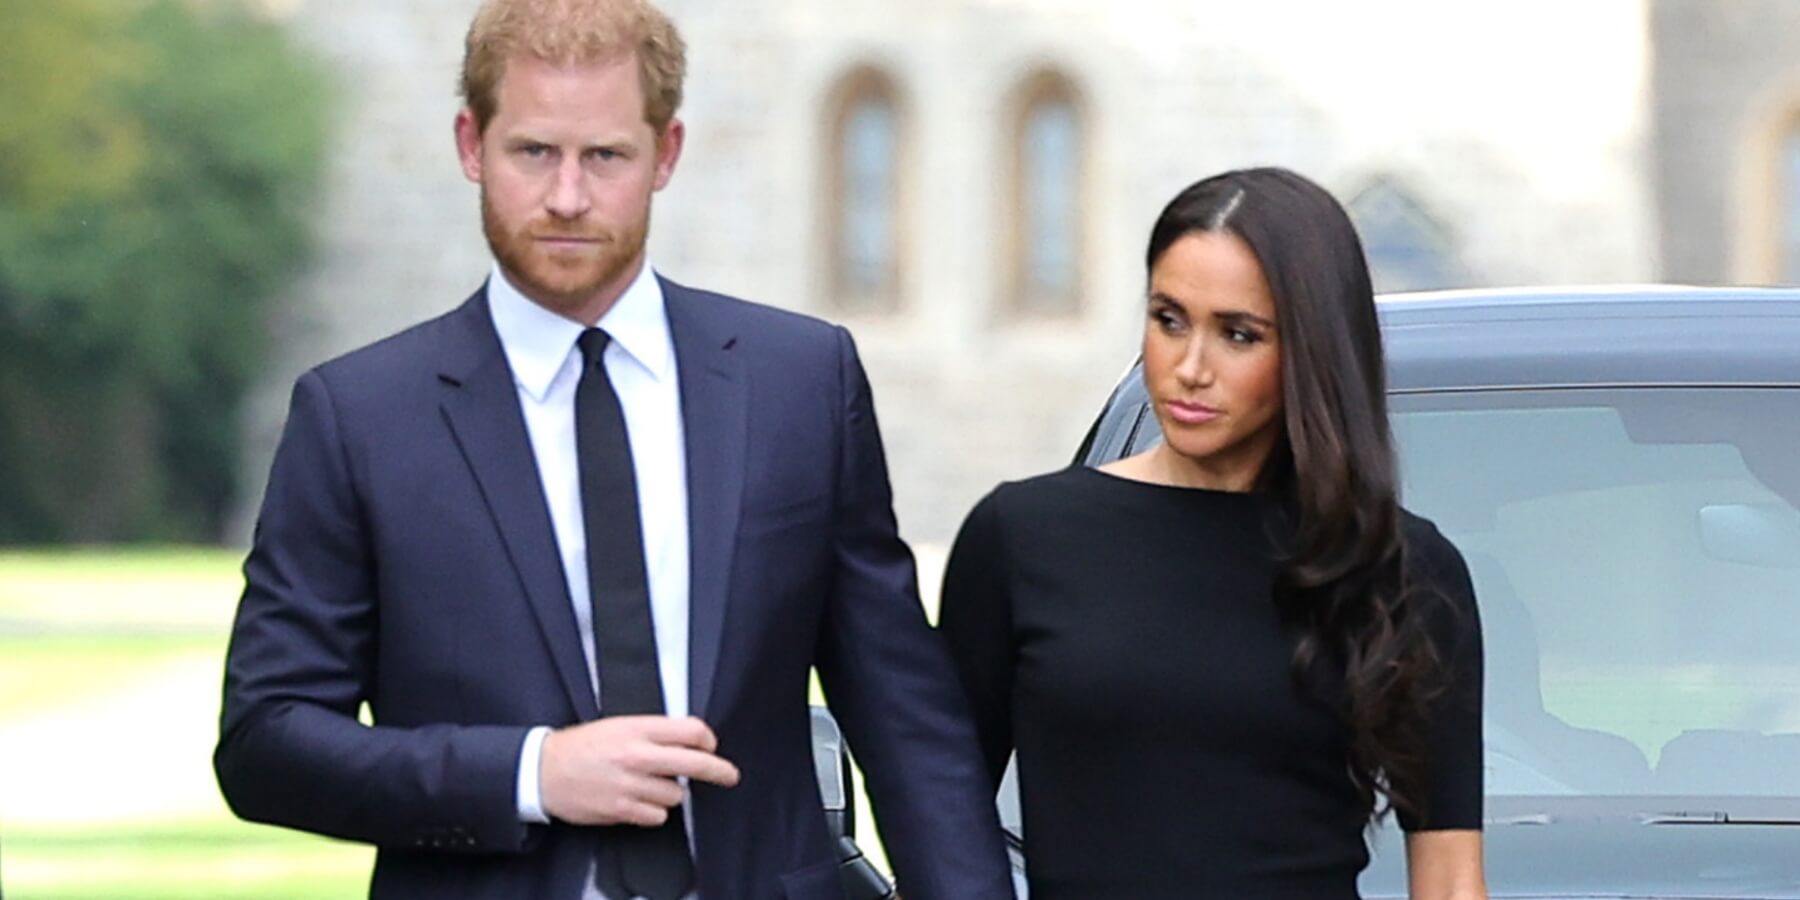 Prince Harry and Meghan Markle photographed during Queen Elizabeth's funeral in 2022